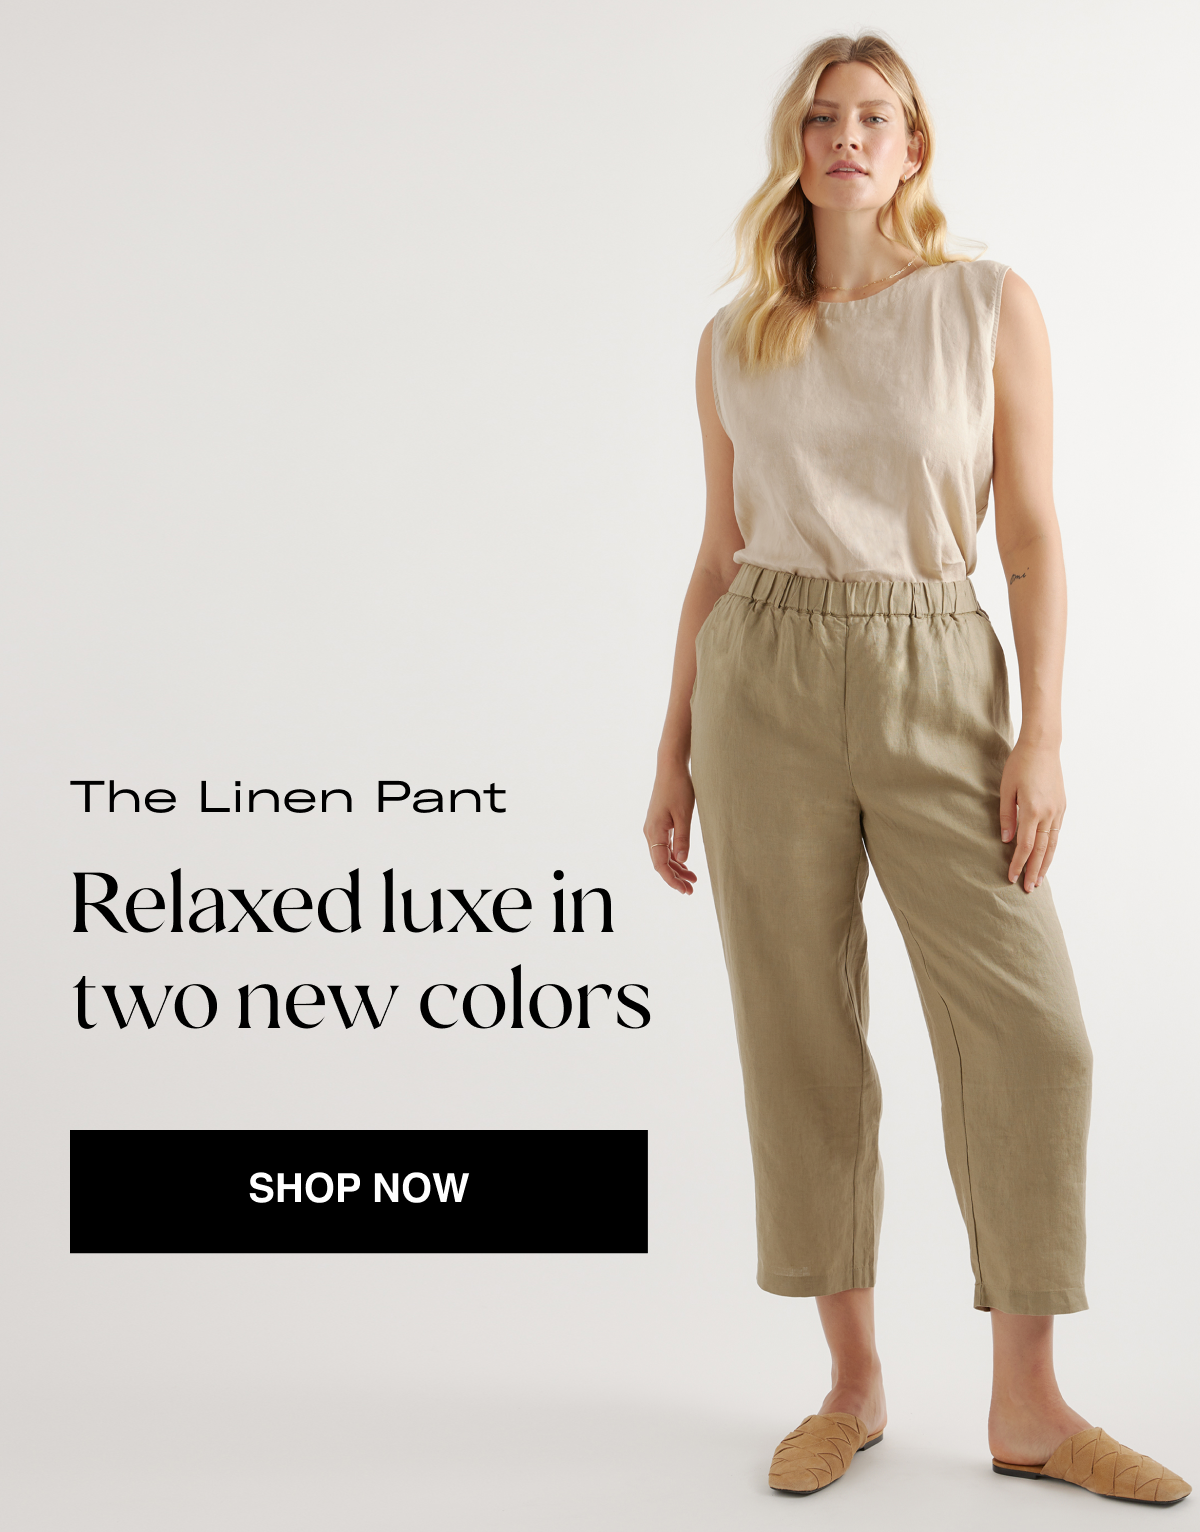 Quince: Linen Pants in new colors? Yes please!